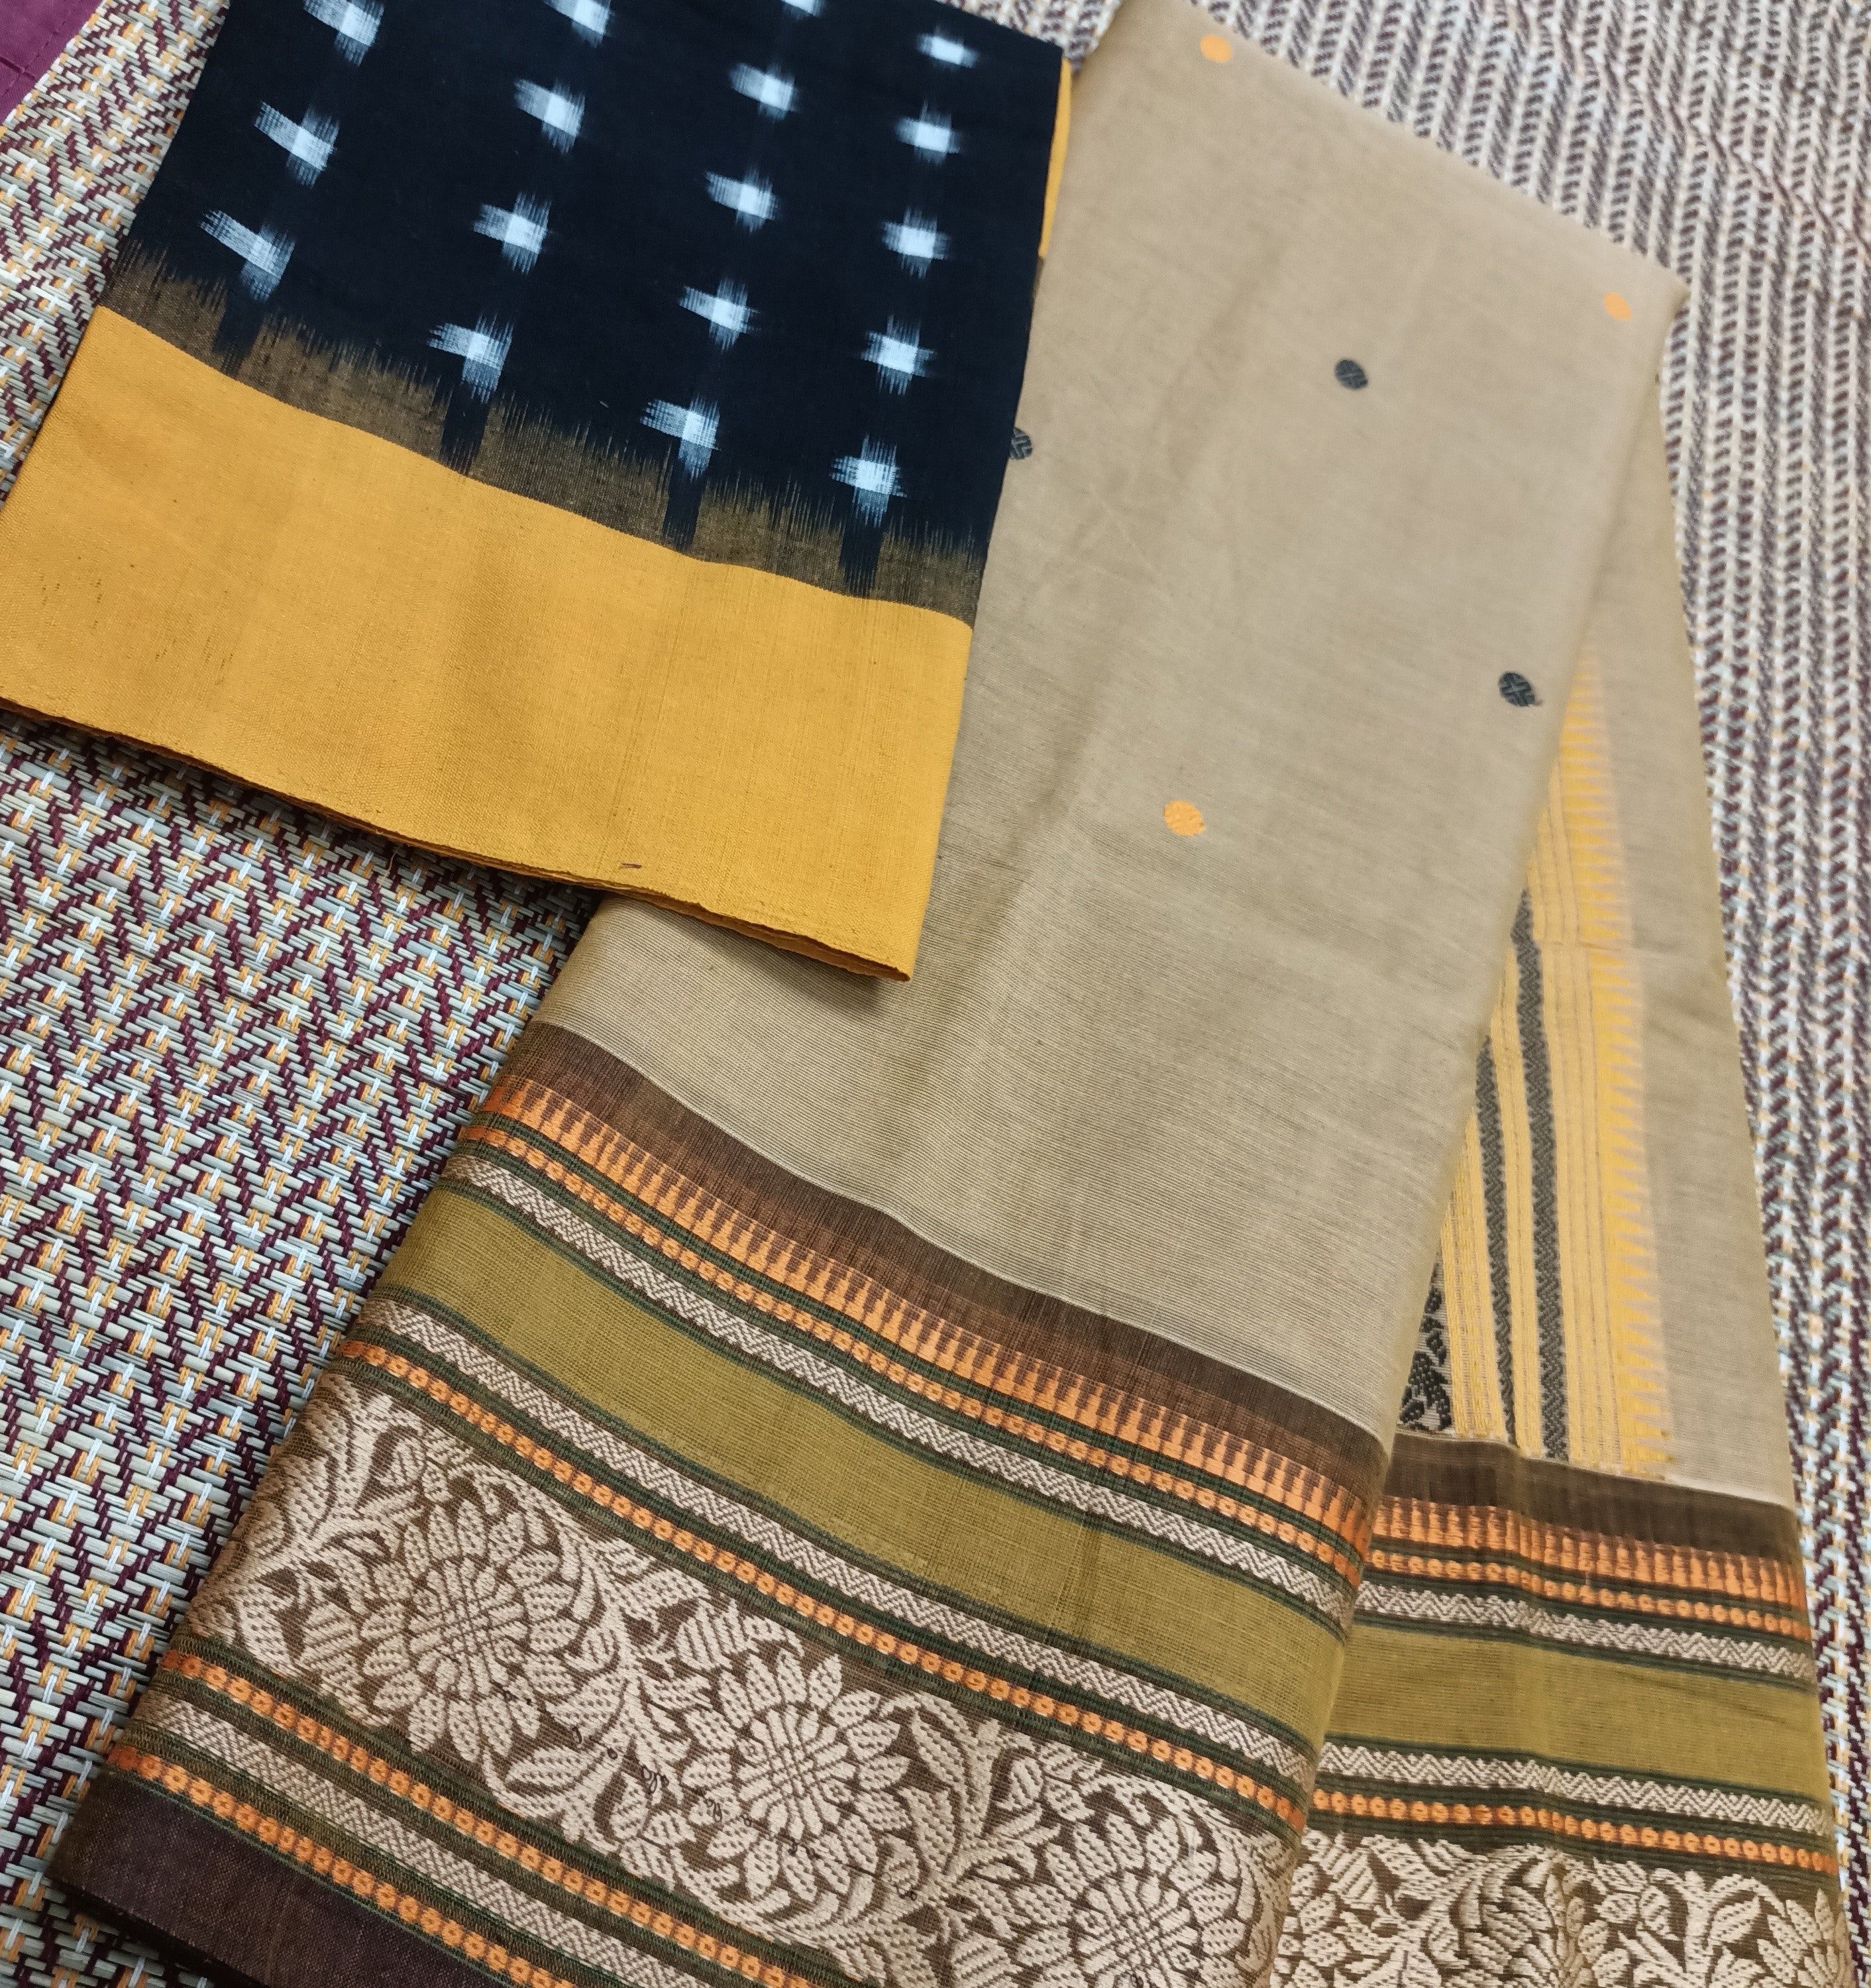 Intricate zari and patterned border on the saree